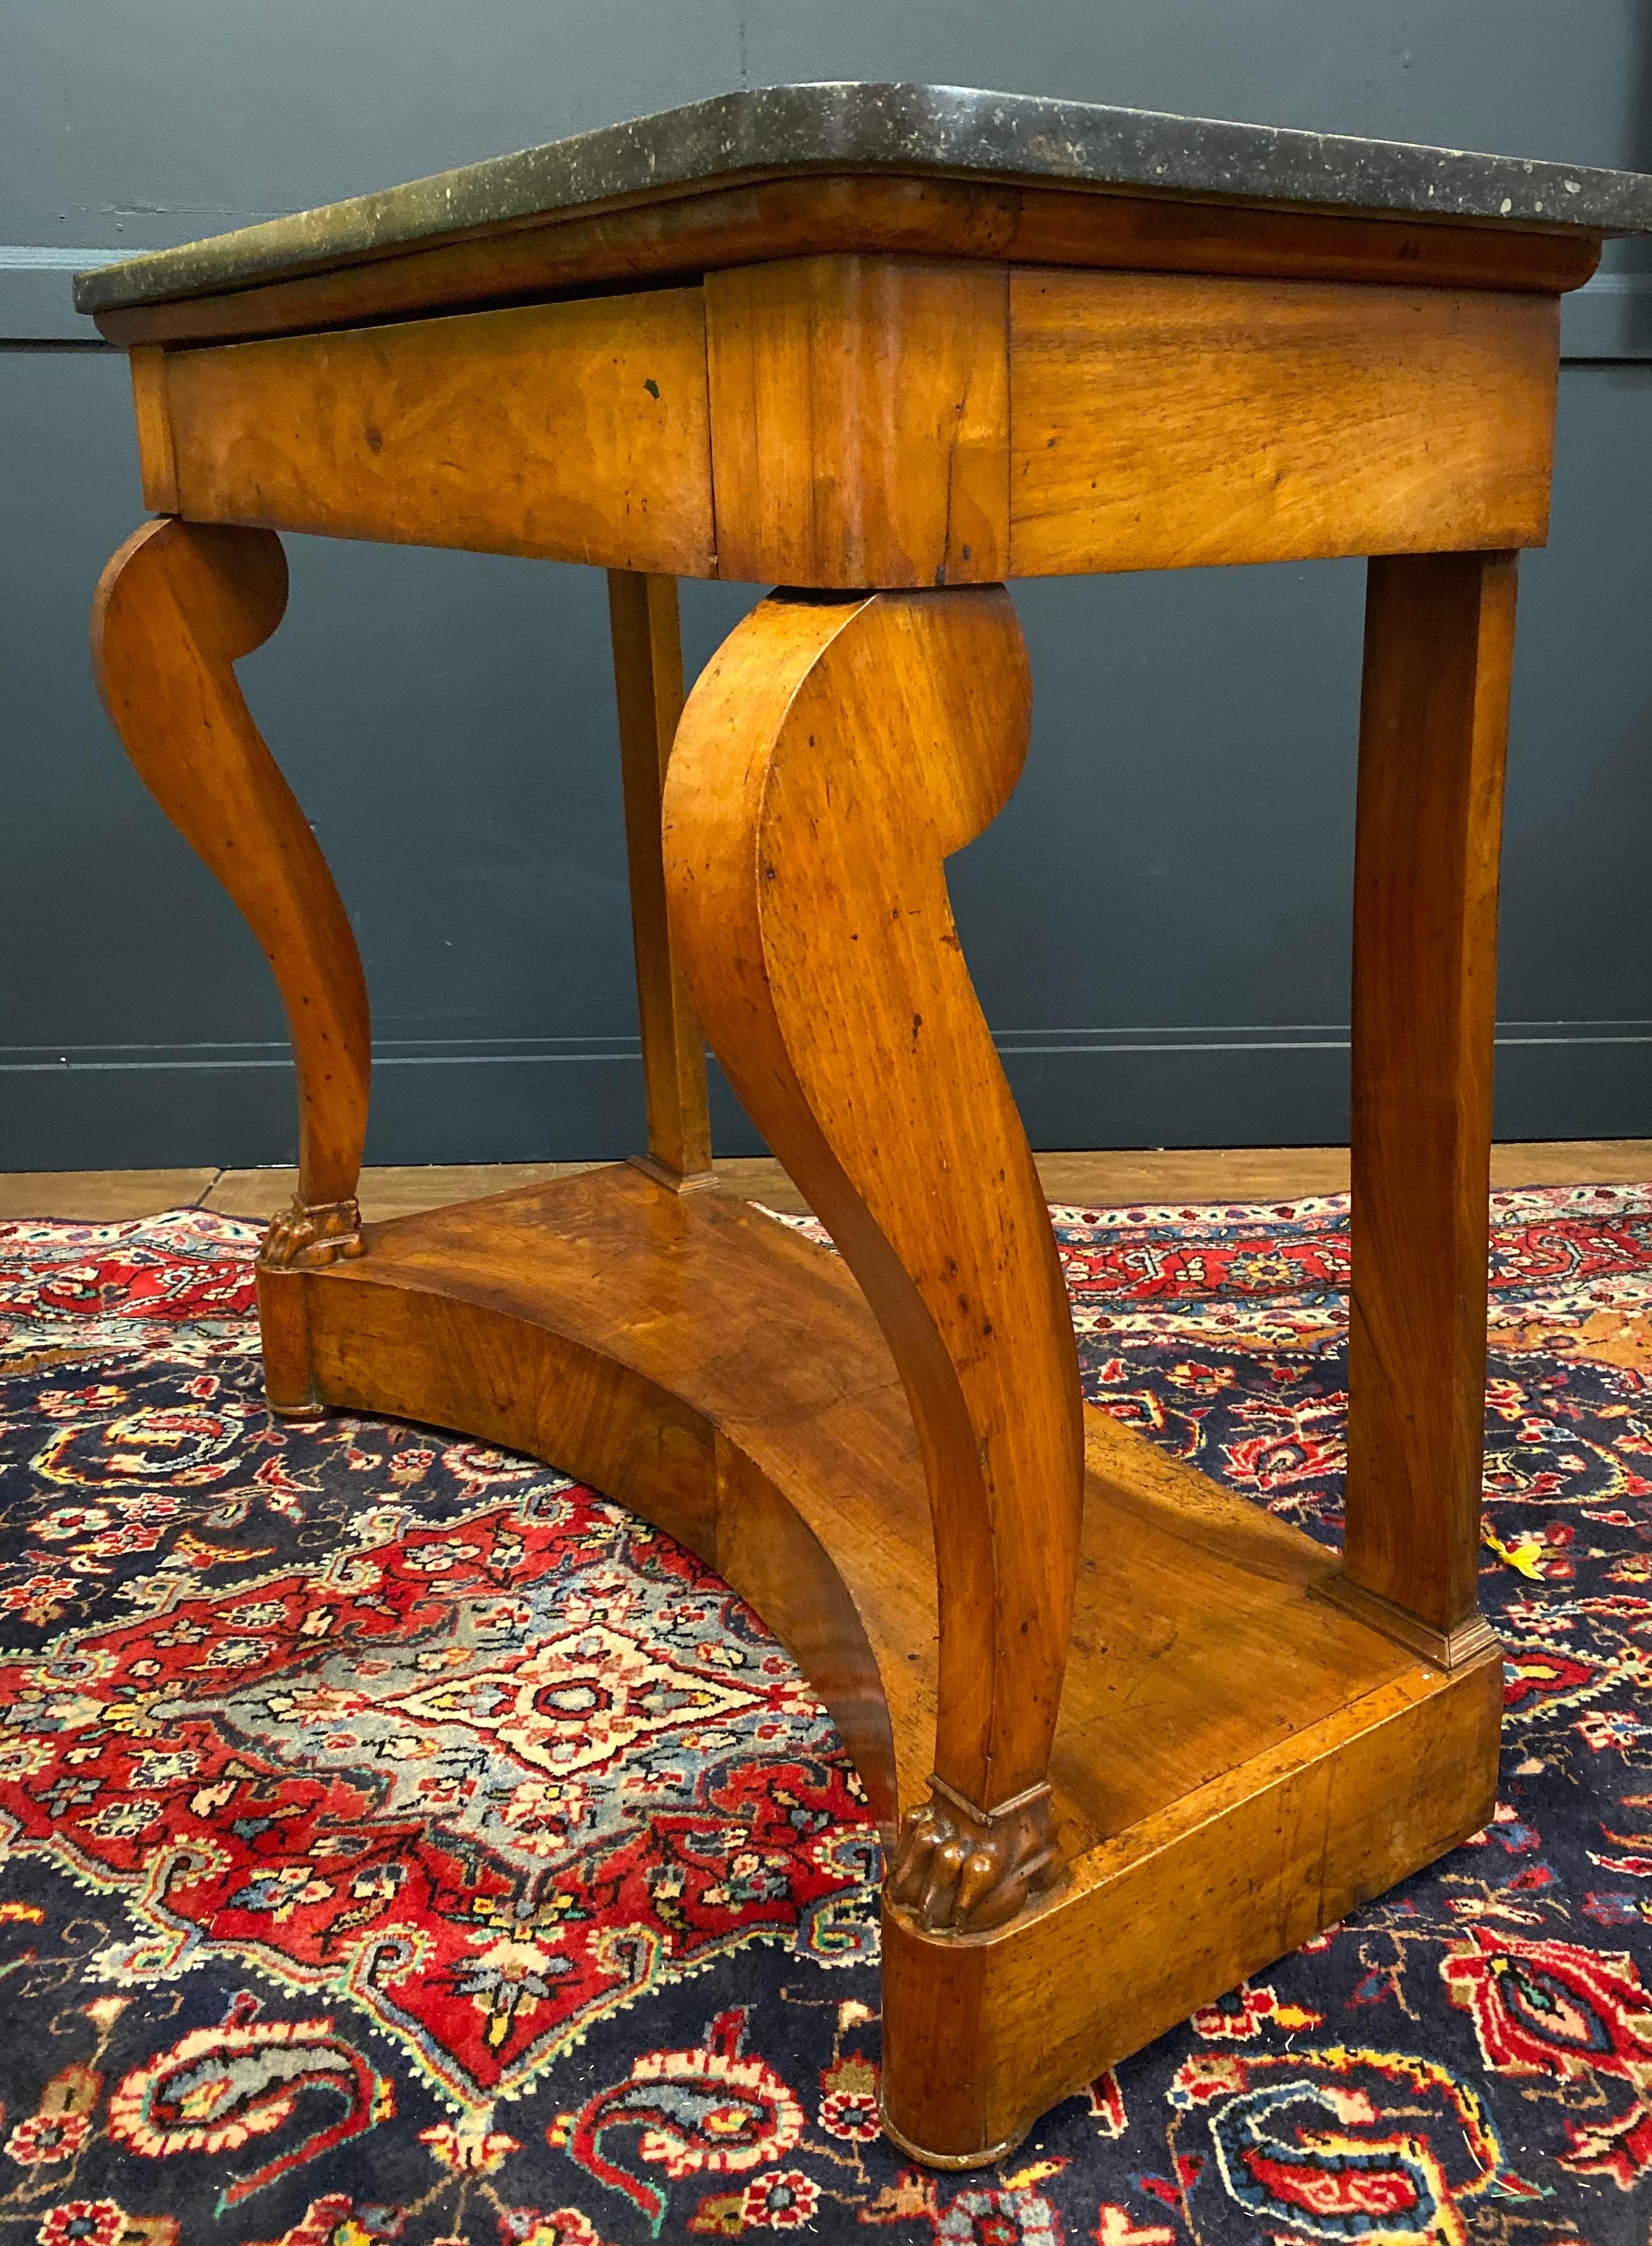 Late 19th century mahogany console table with a black marble rounded corner top.
This marble-top console table is resting on two straight legs in the back, and two front scrolled legs ending with paw feet.